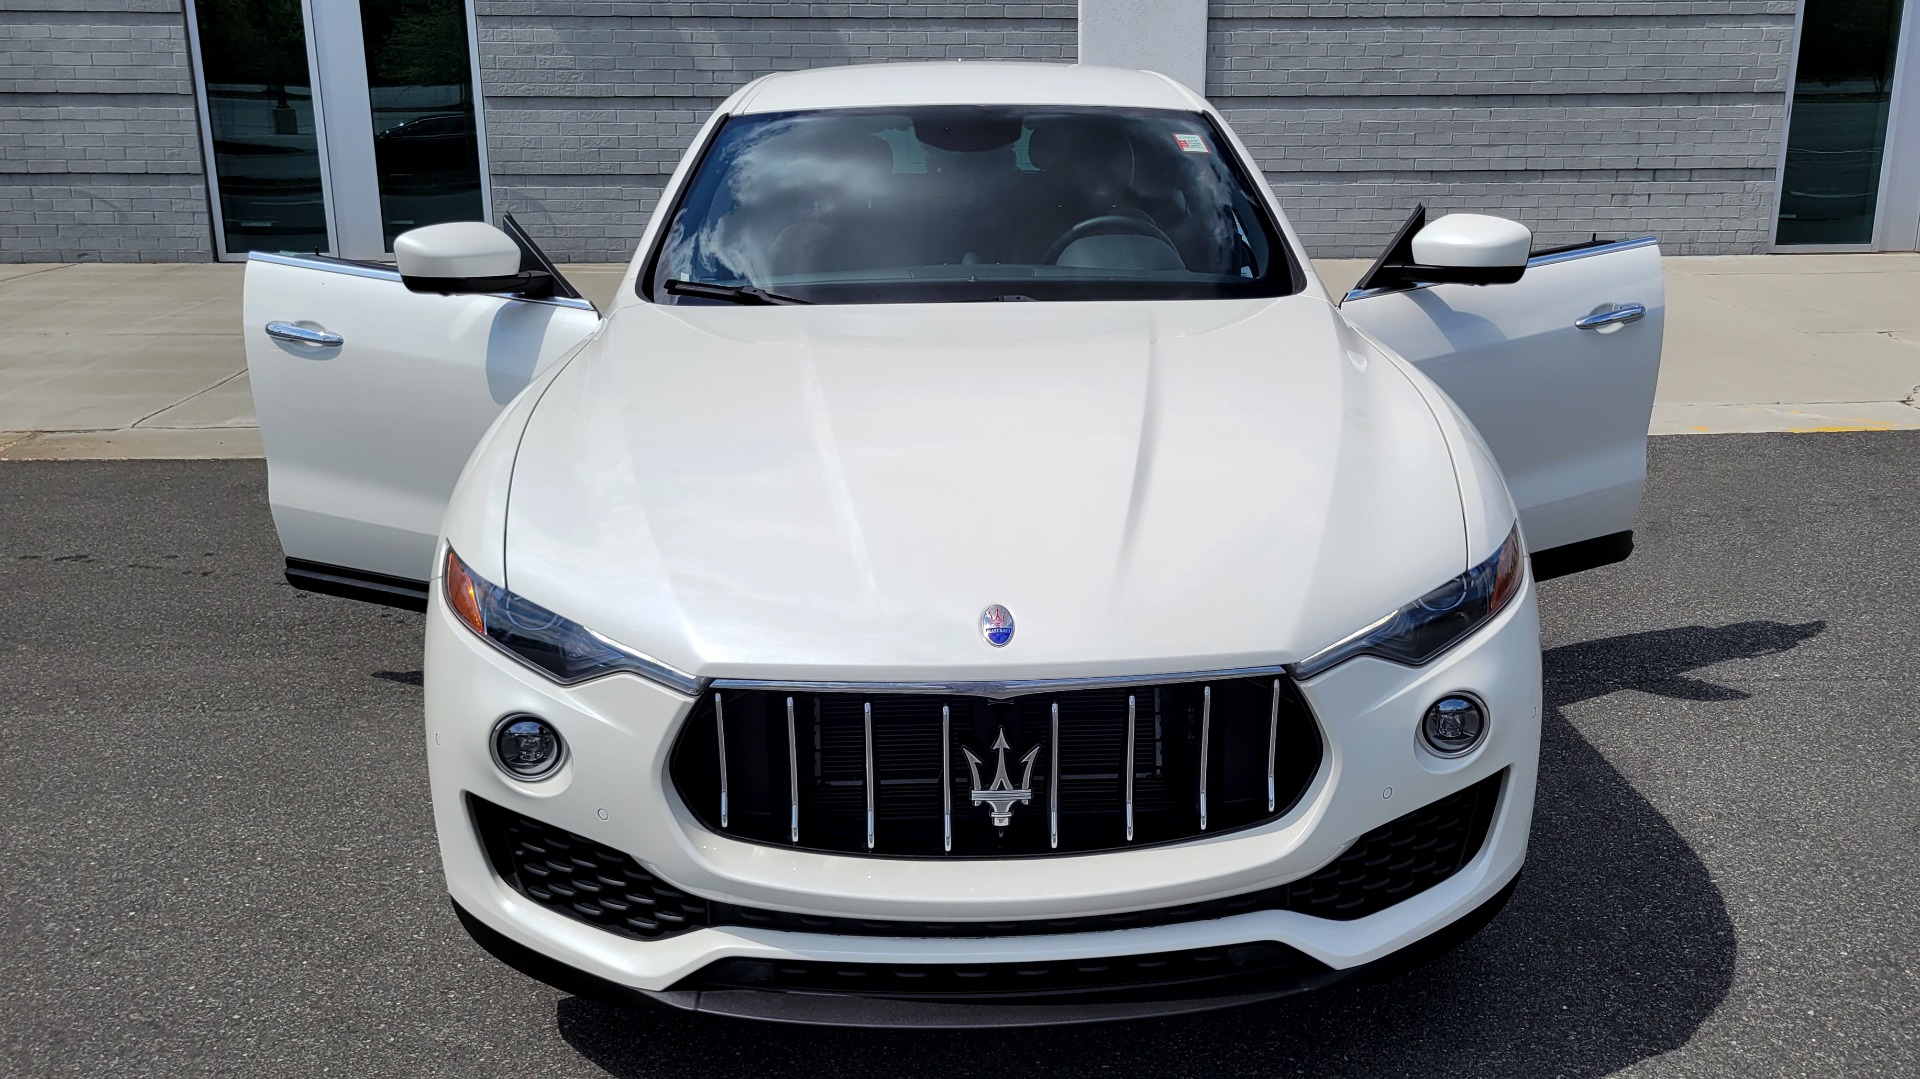 Used 2018 Maserati LEVANTE 3.0L 345HP SUV / 8-SPD / PREMIUM / BSA / NAV / 20IN WHLS / REARVIEW for sale $50,495 at Formula Imports in Charlotte NC 28227 30